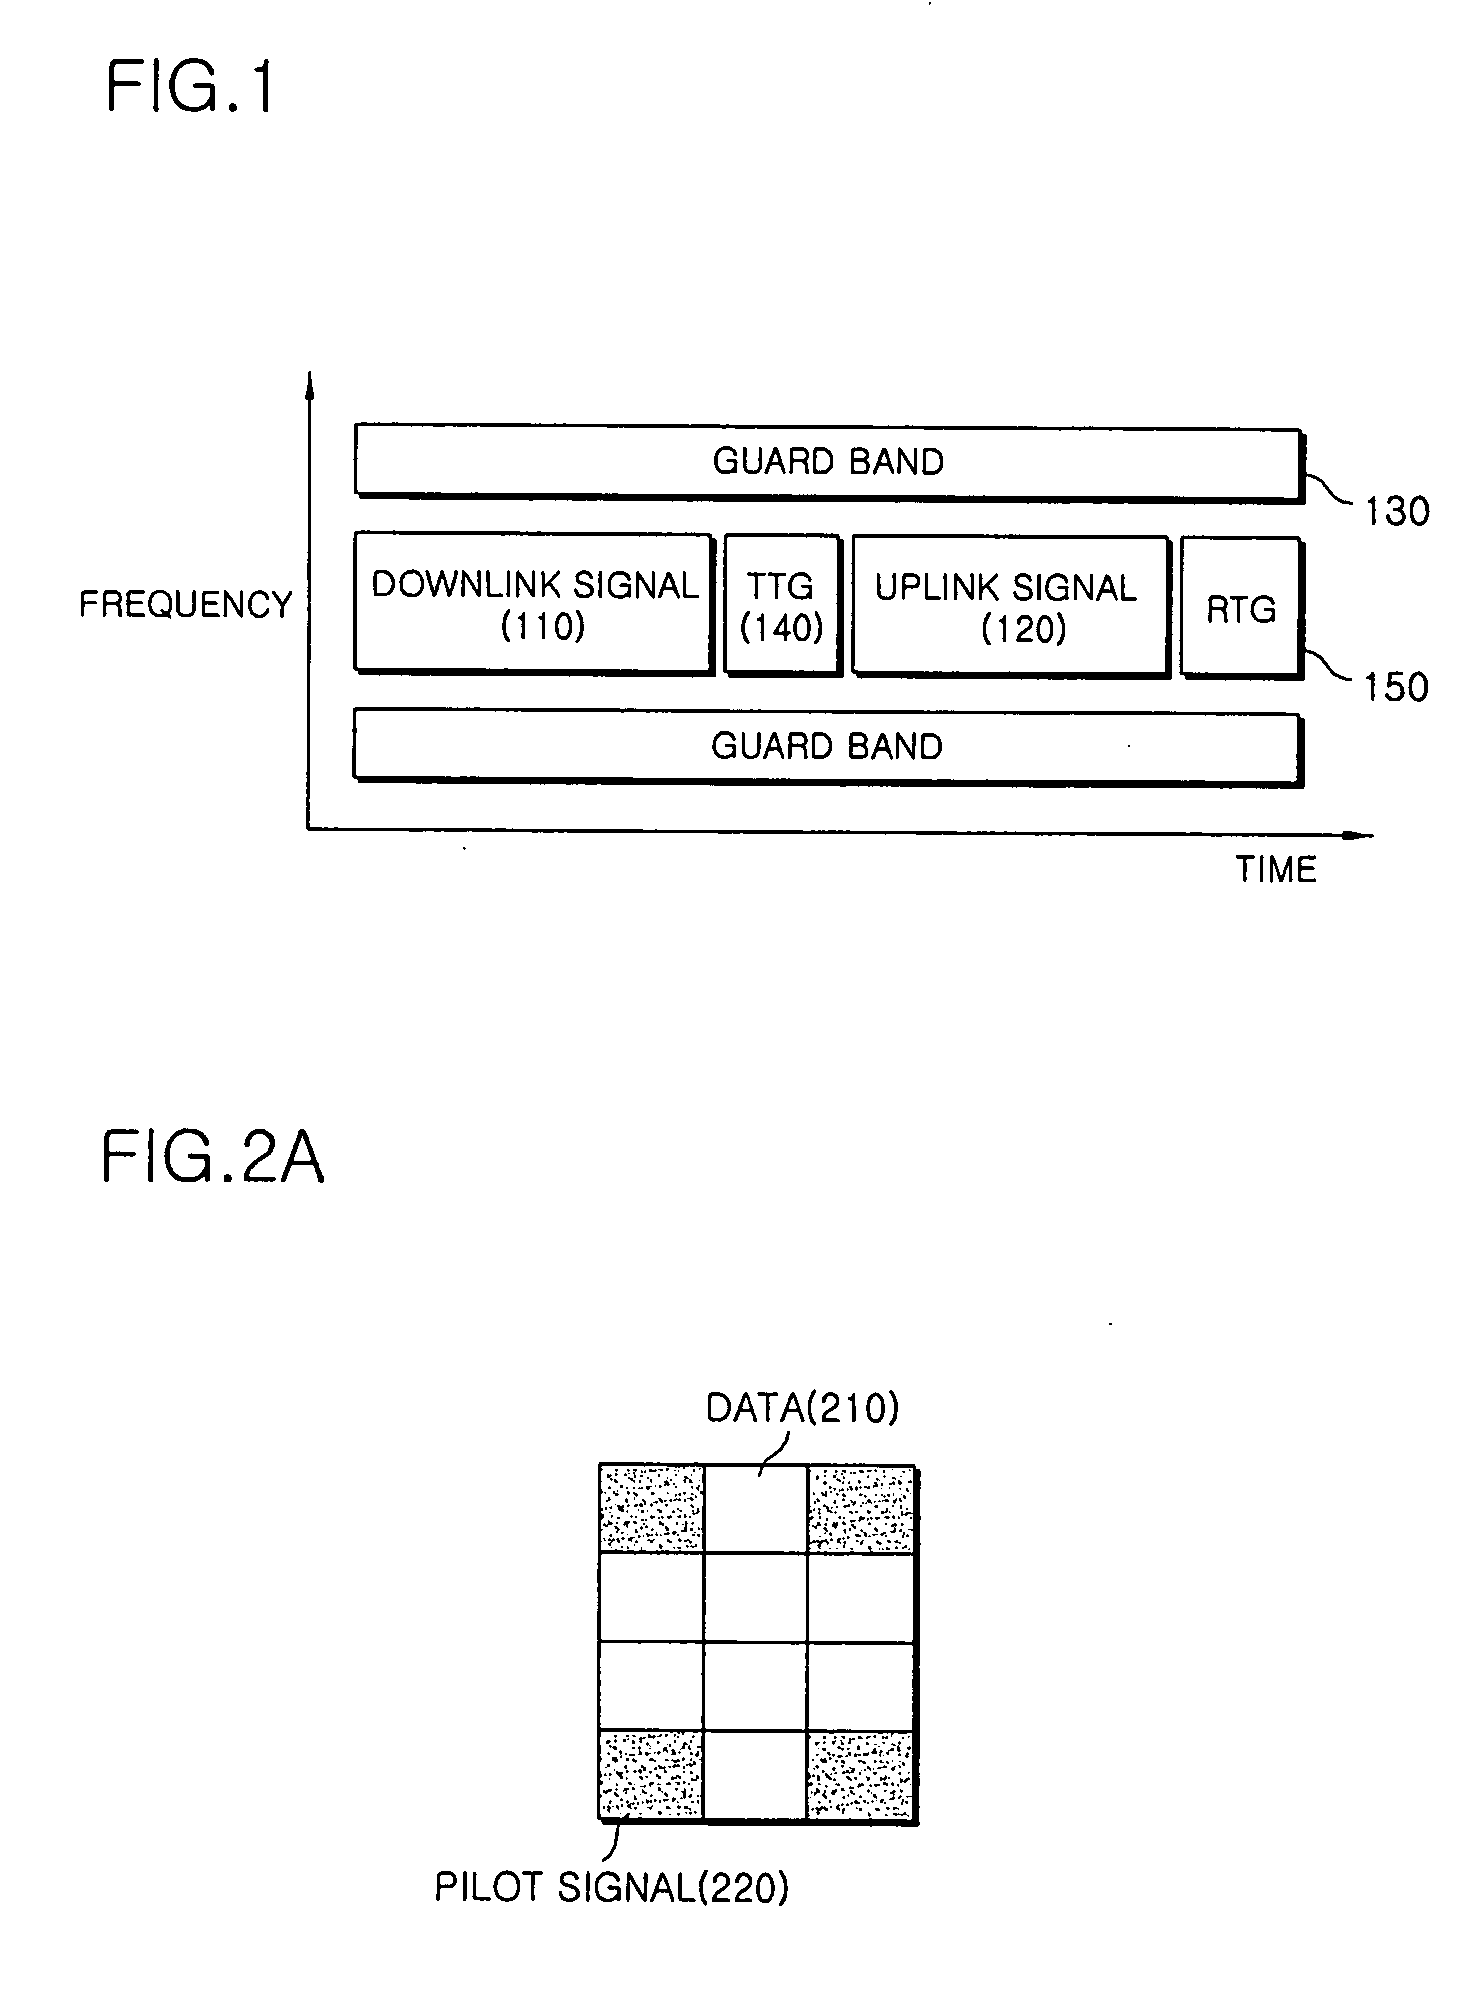 Method and apparatus for measuring uplink data throughput in WiBro repeater